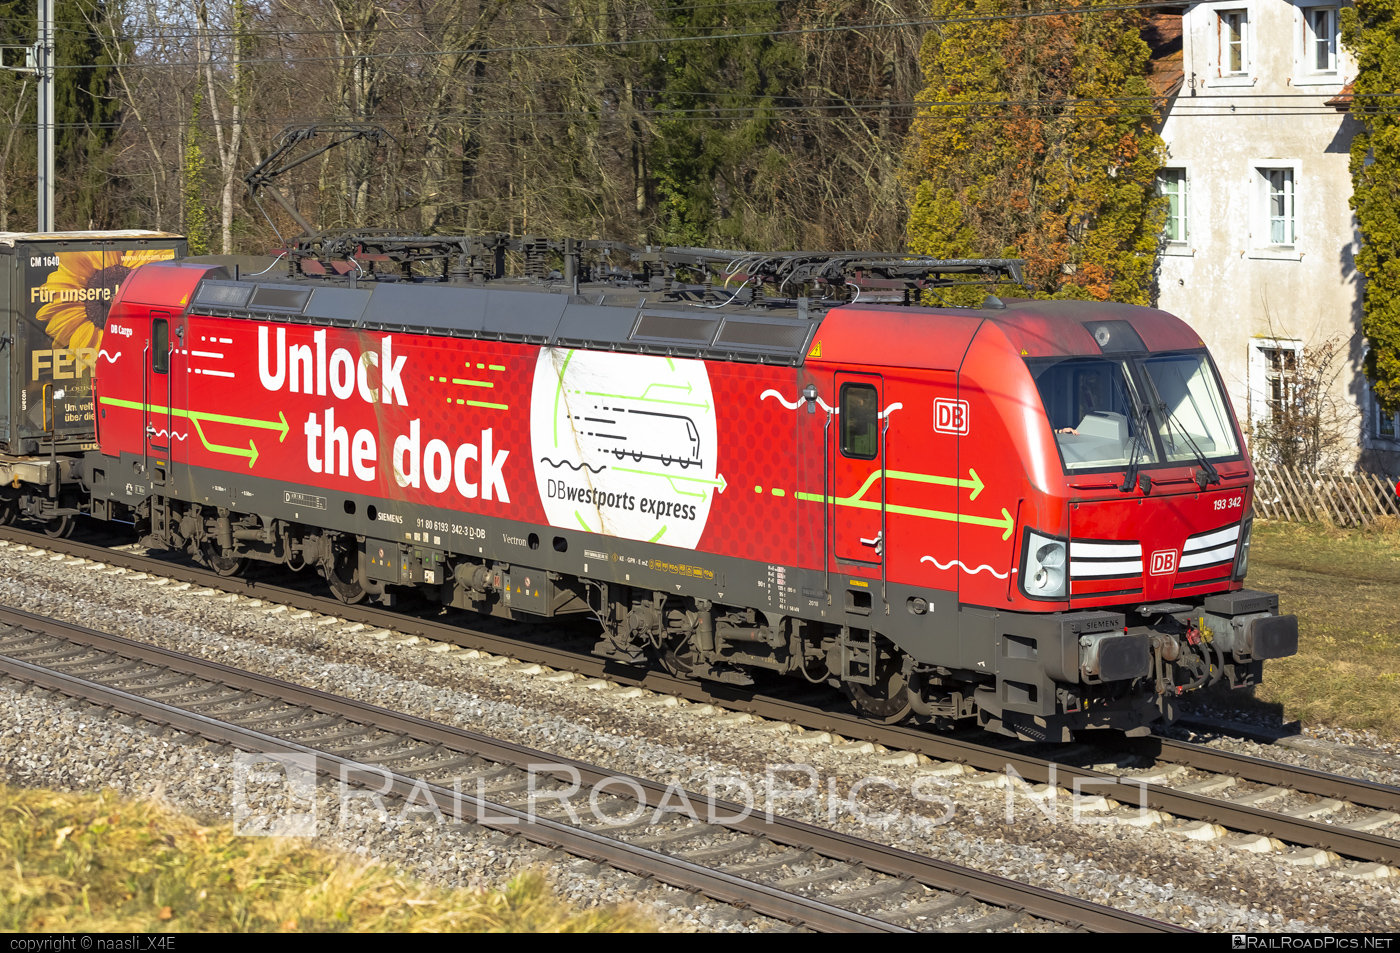 Siemens Vectron MS - 193 342-3 operated by DB Cargo AG #db #dbcargo #dbcargoag #deutschebahn #siemens #siemensVectron #siemensVectronMS #vectron #vectronMS